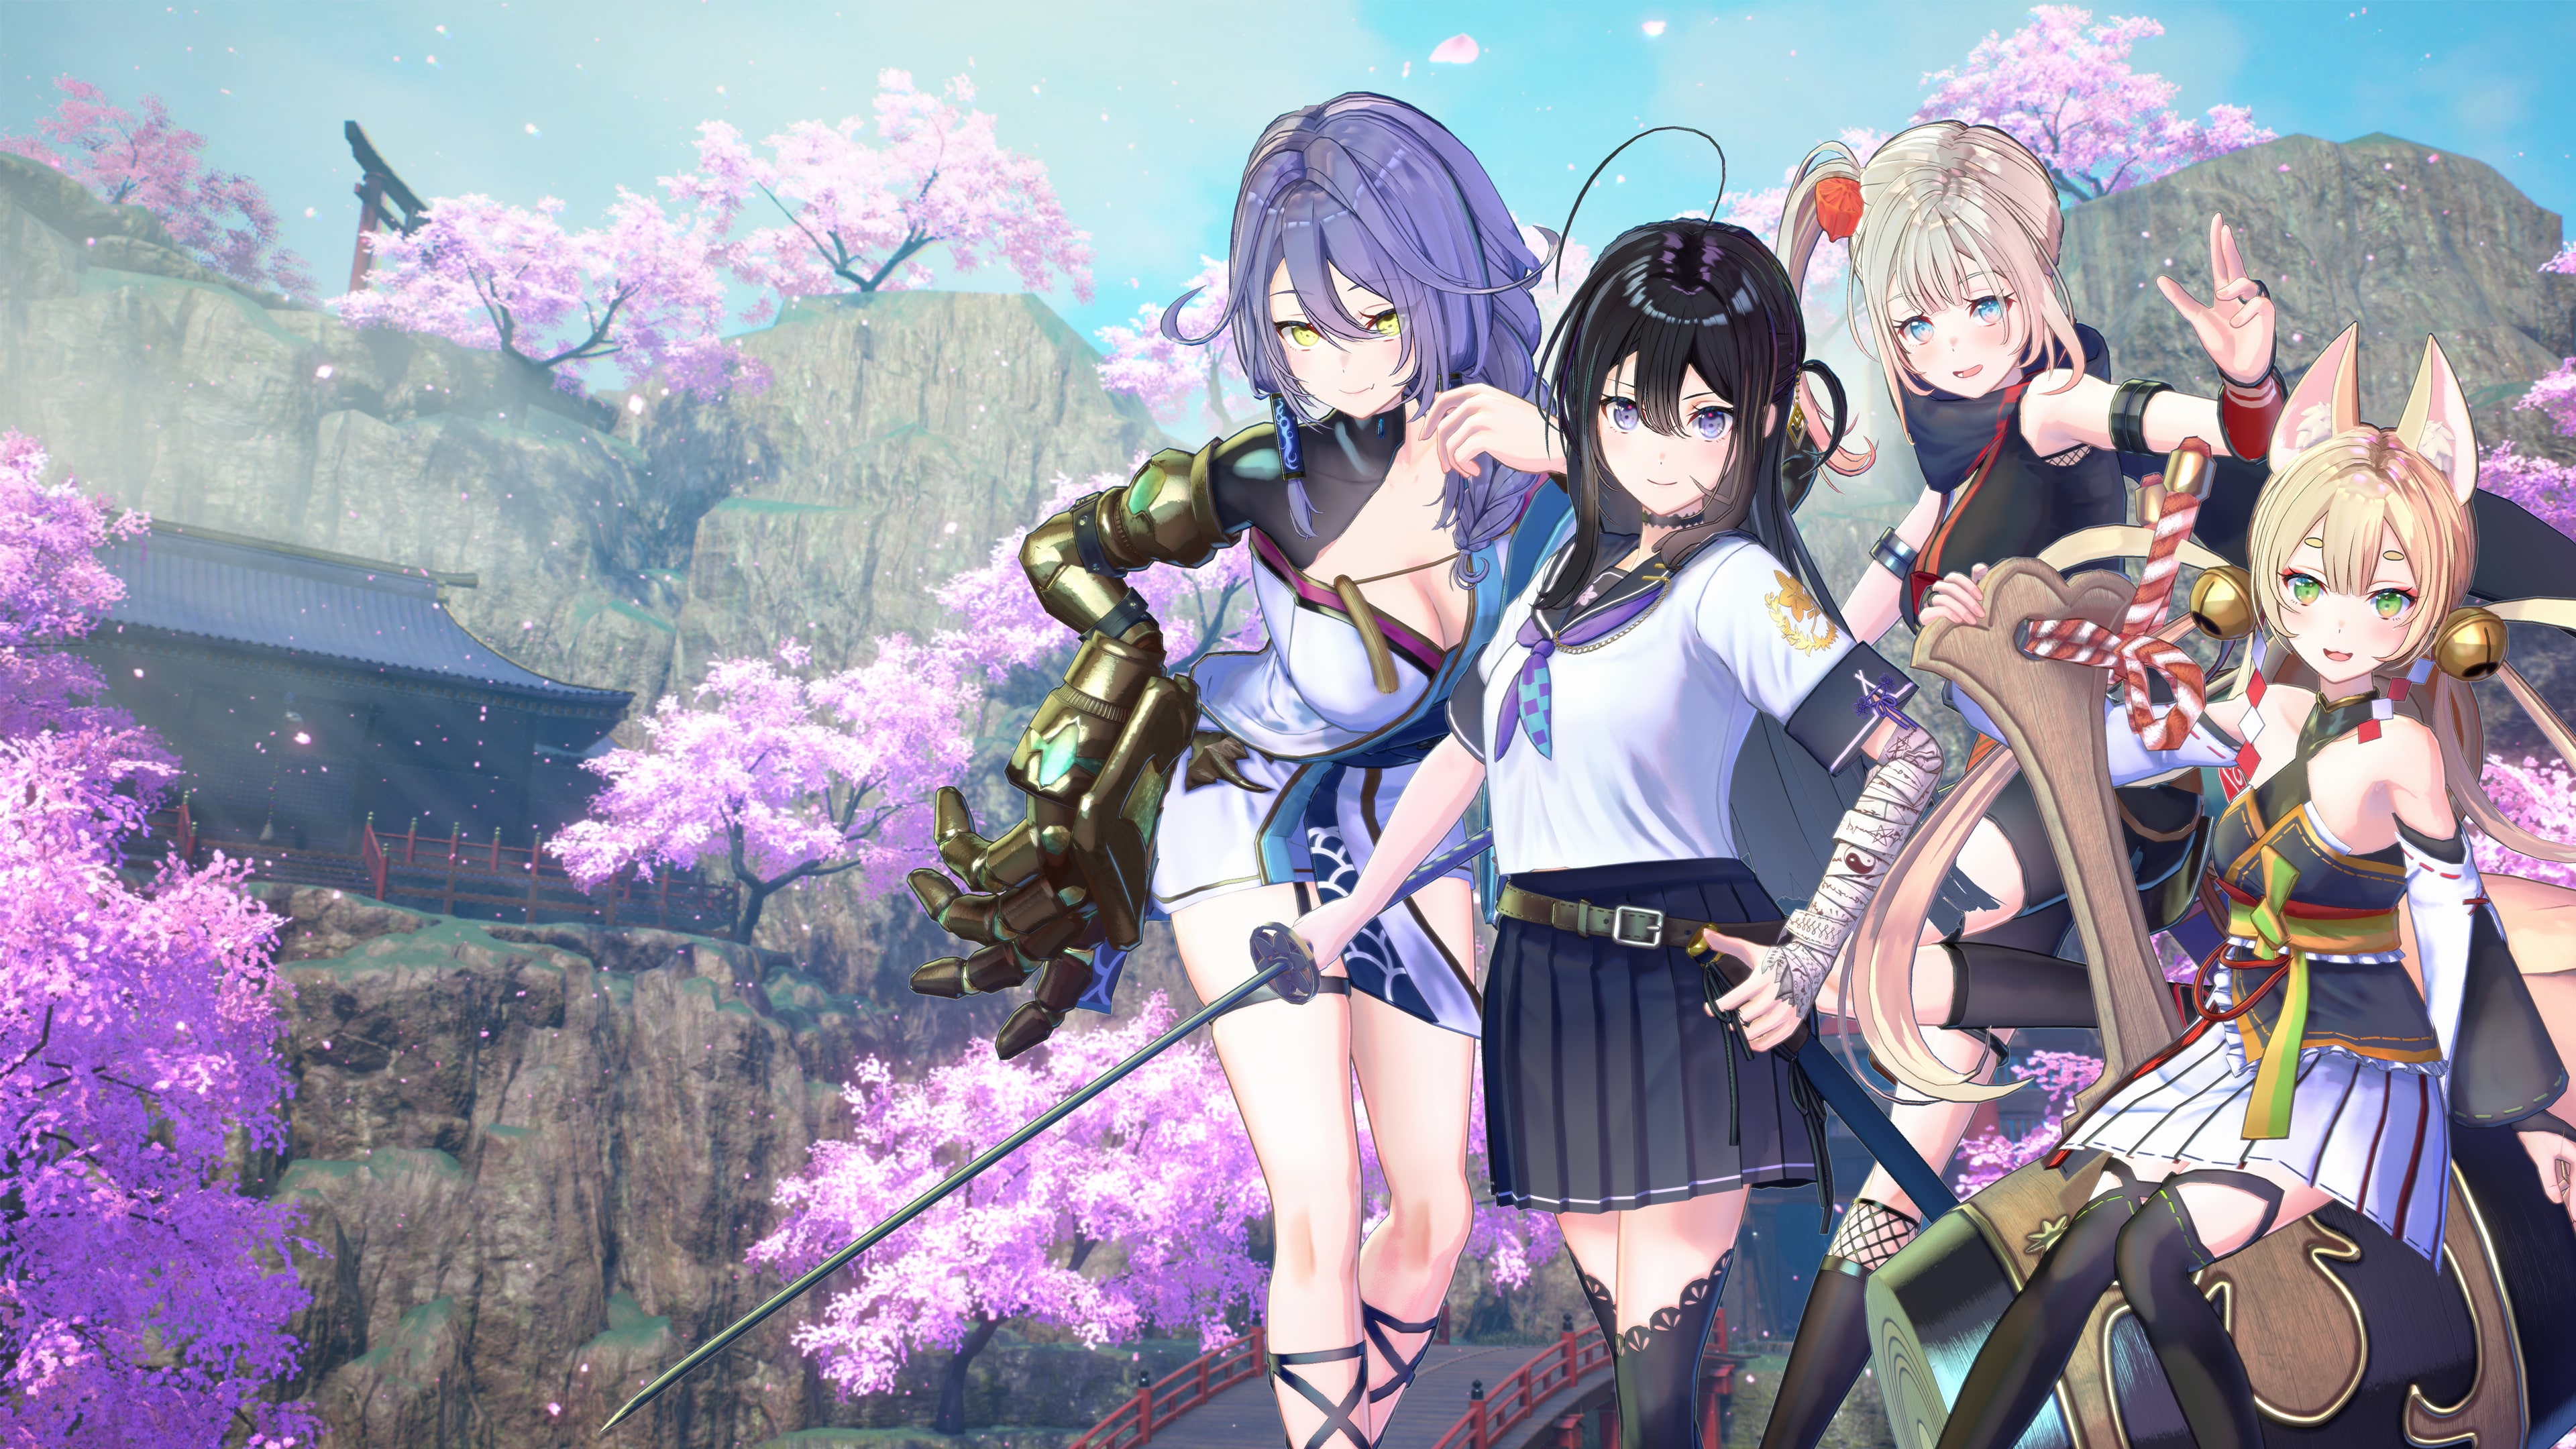 SAMURAI MAIDEN (PS4 & PS5) (Simplified Chinese, English, Korean, Japanese, Traditional Chinese)